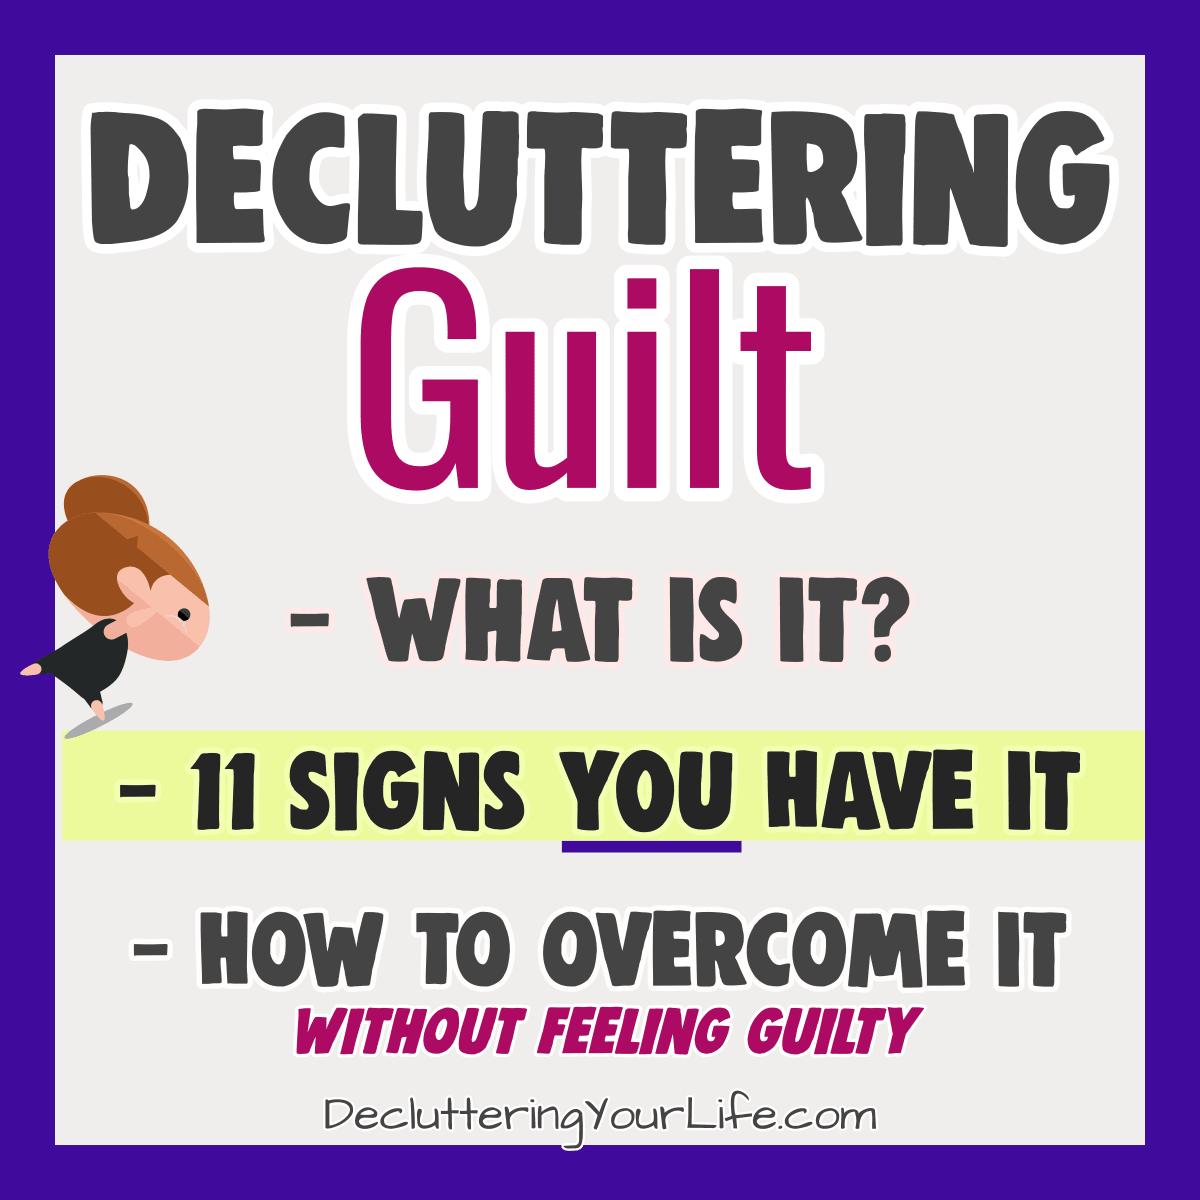 Decluttering Guilt - How to Declutter WITHOUT Feeling GUILTY Throwing Things Away - signs of decluttering guilt and how to overcome guilty feelings when getting rid of clutter